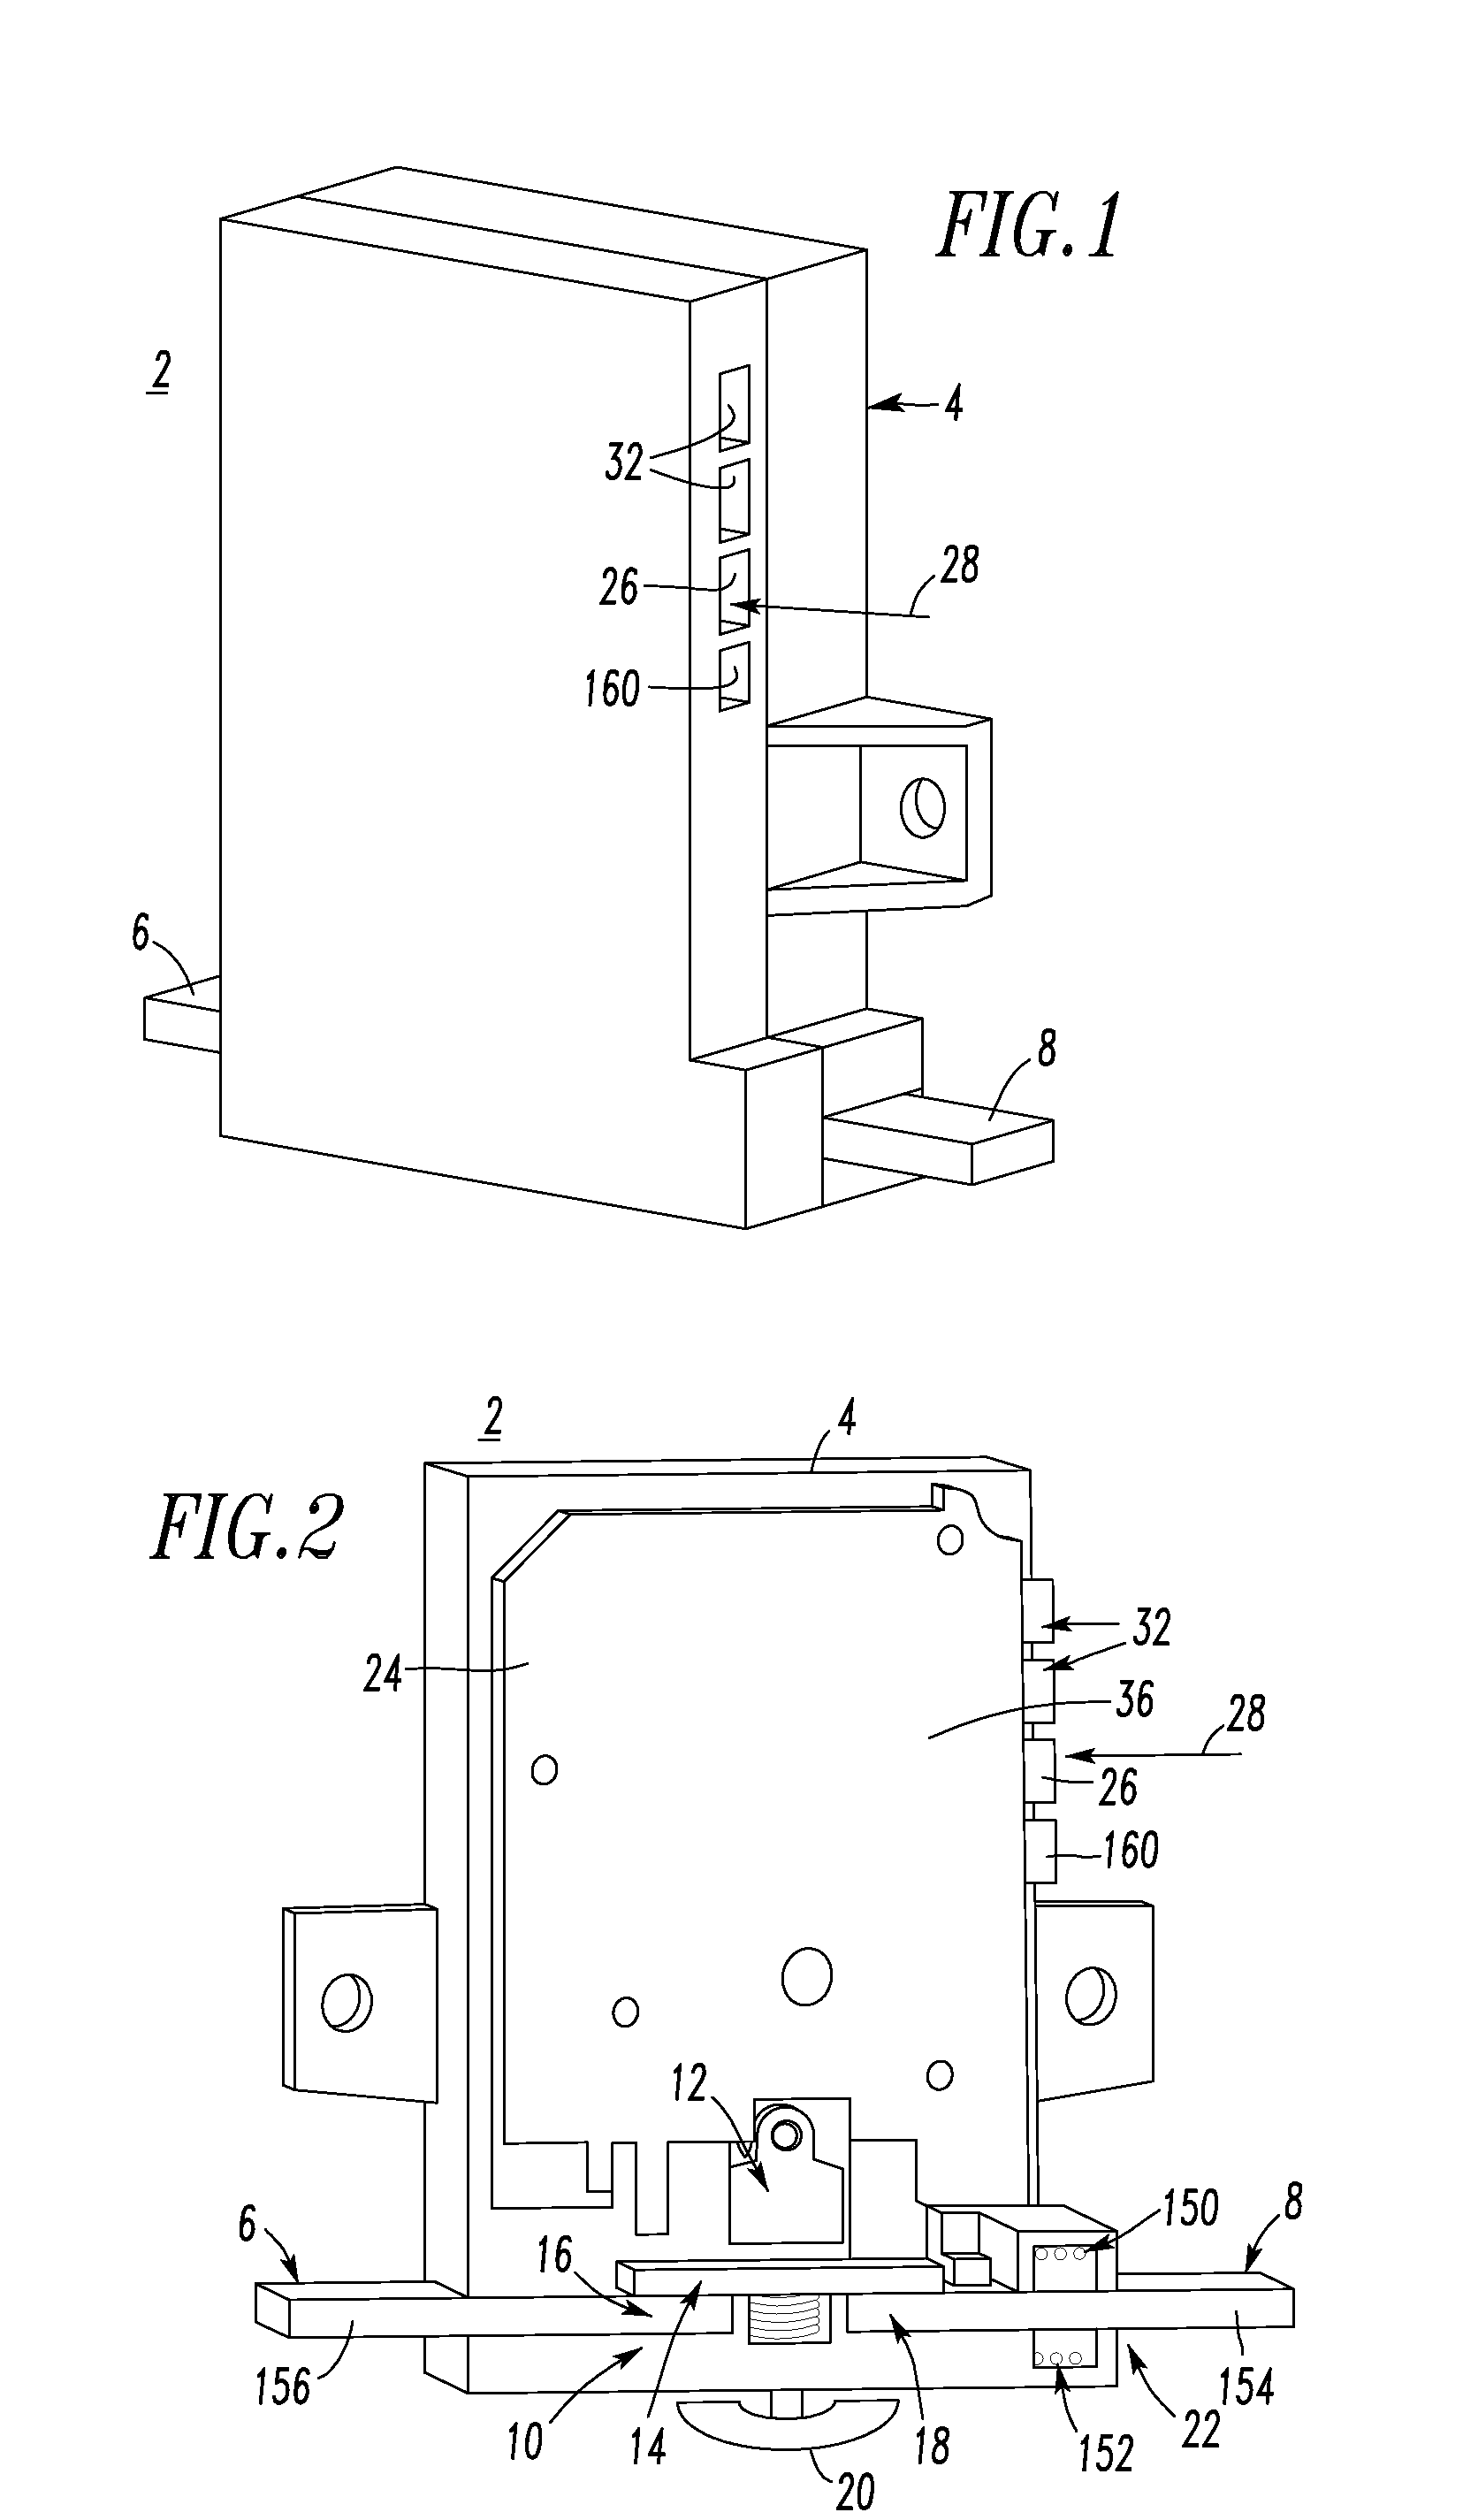 Direct current and battery disconnect apparatus